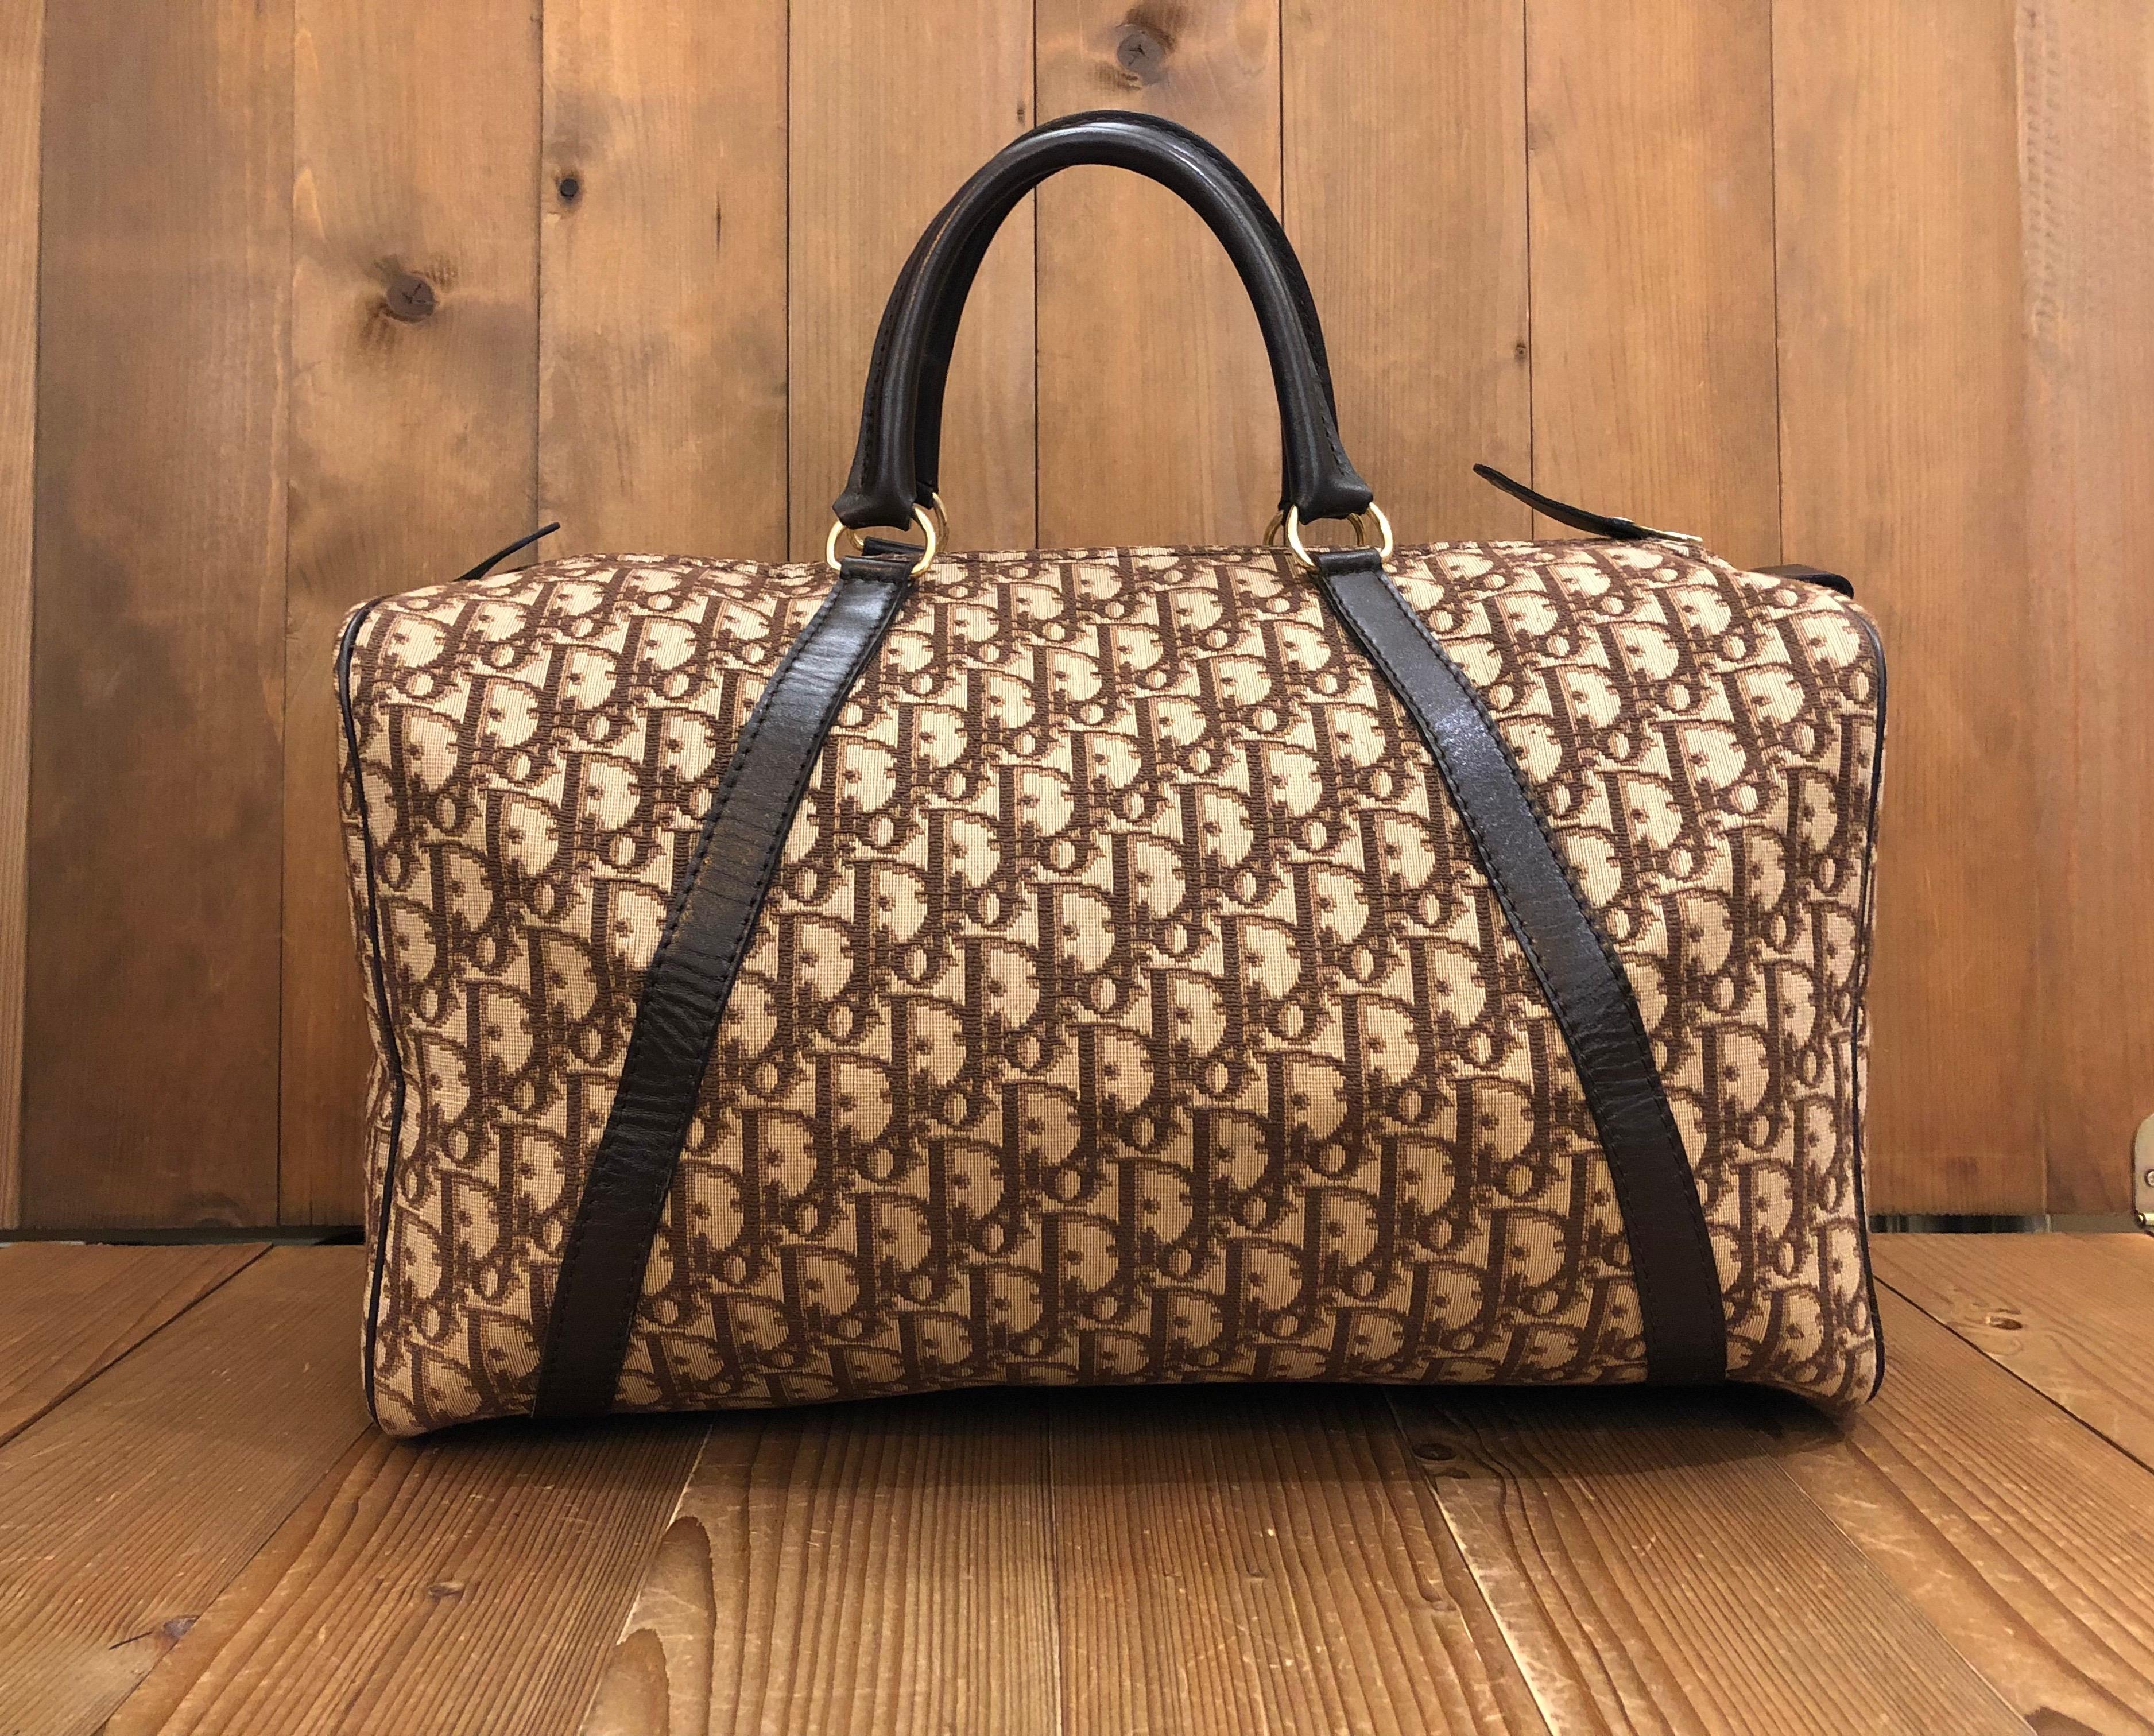 This vintage CHRISTIAN DIOR boston bag is crafted of iconic Dior Trotter jacquard and leather in brown. Top zipper closure opens to a coated interior in brown featuring a zippered pocket. Made in France. Measures approximately 15.5 x 8.5 x 9.5